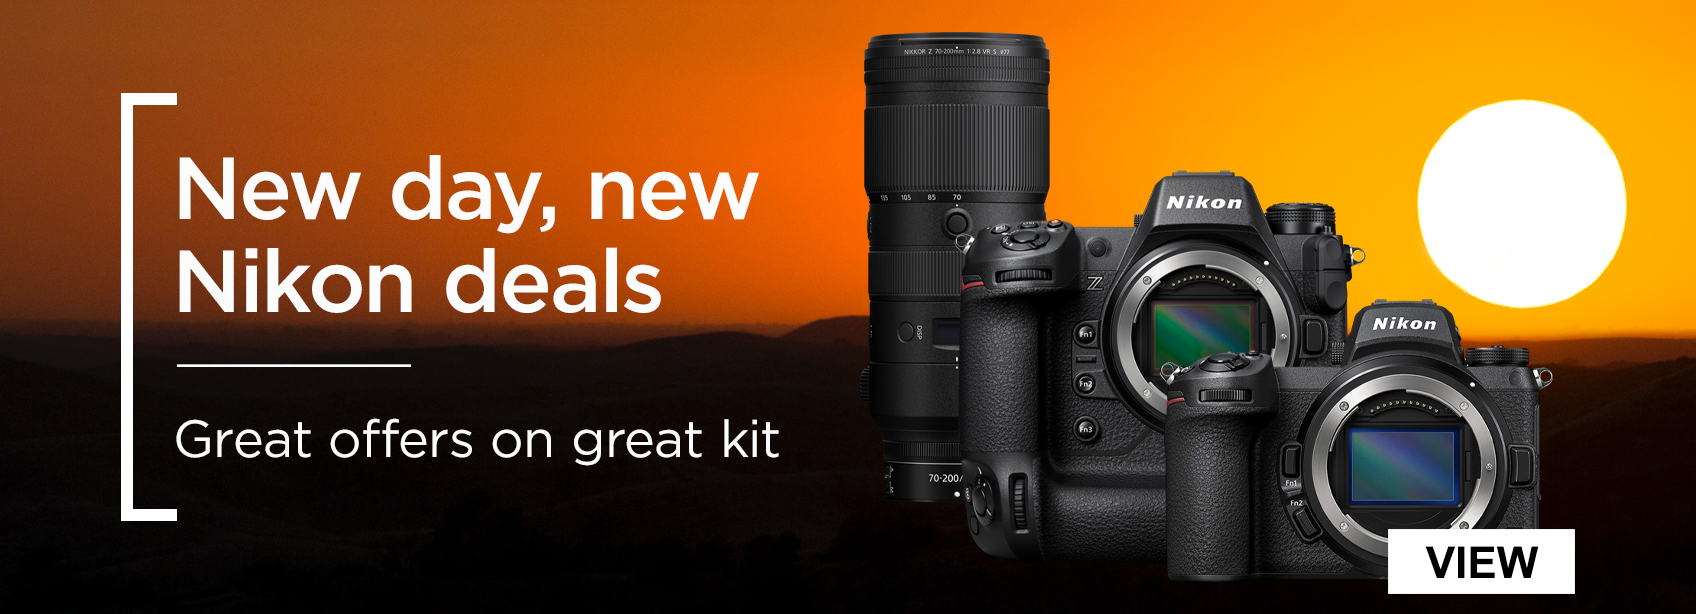 New day, new Nikon deals. Great offers on great kit. 